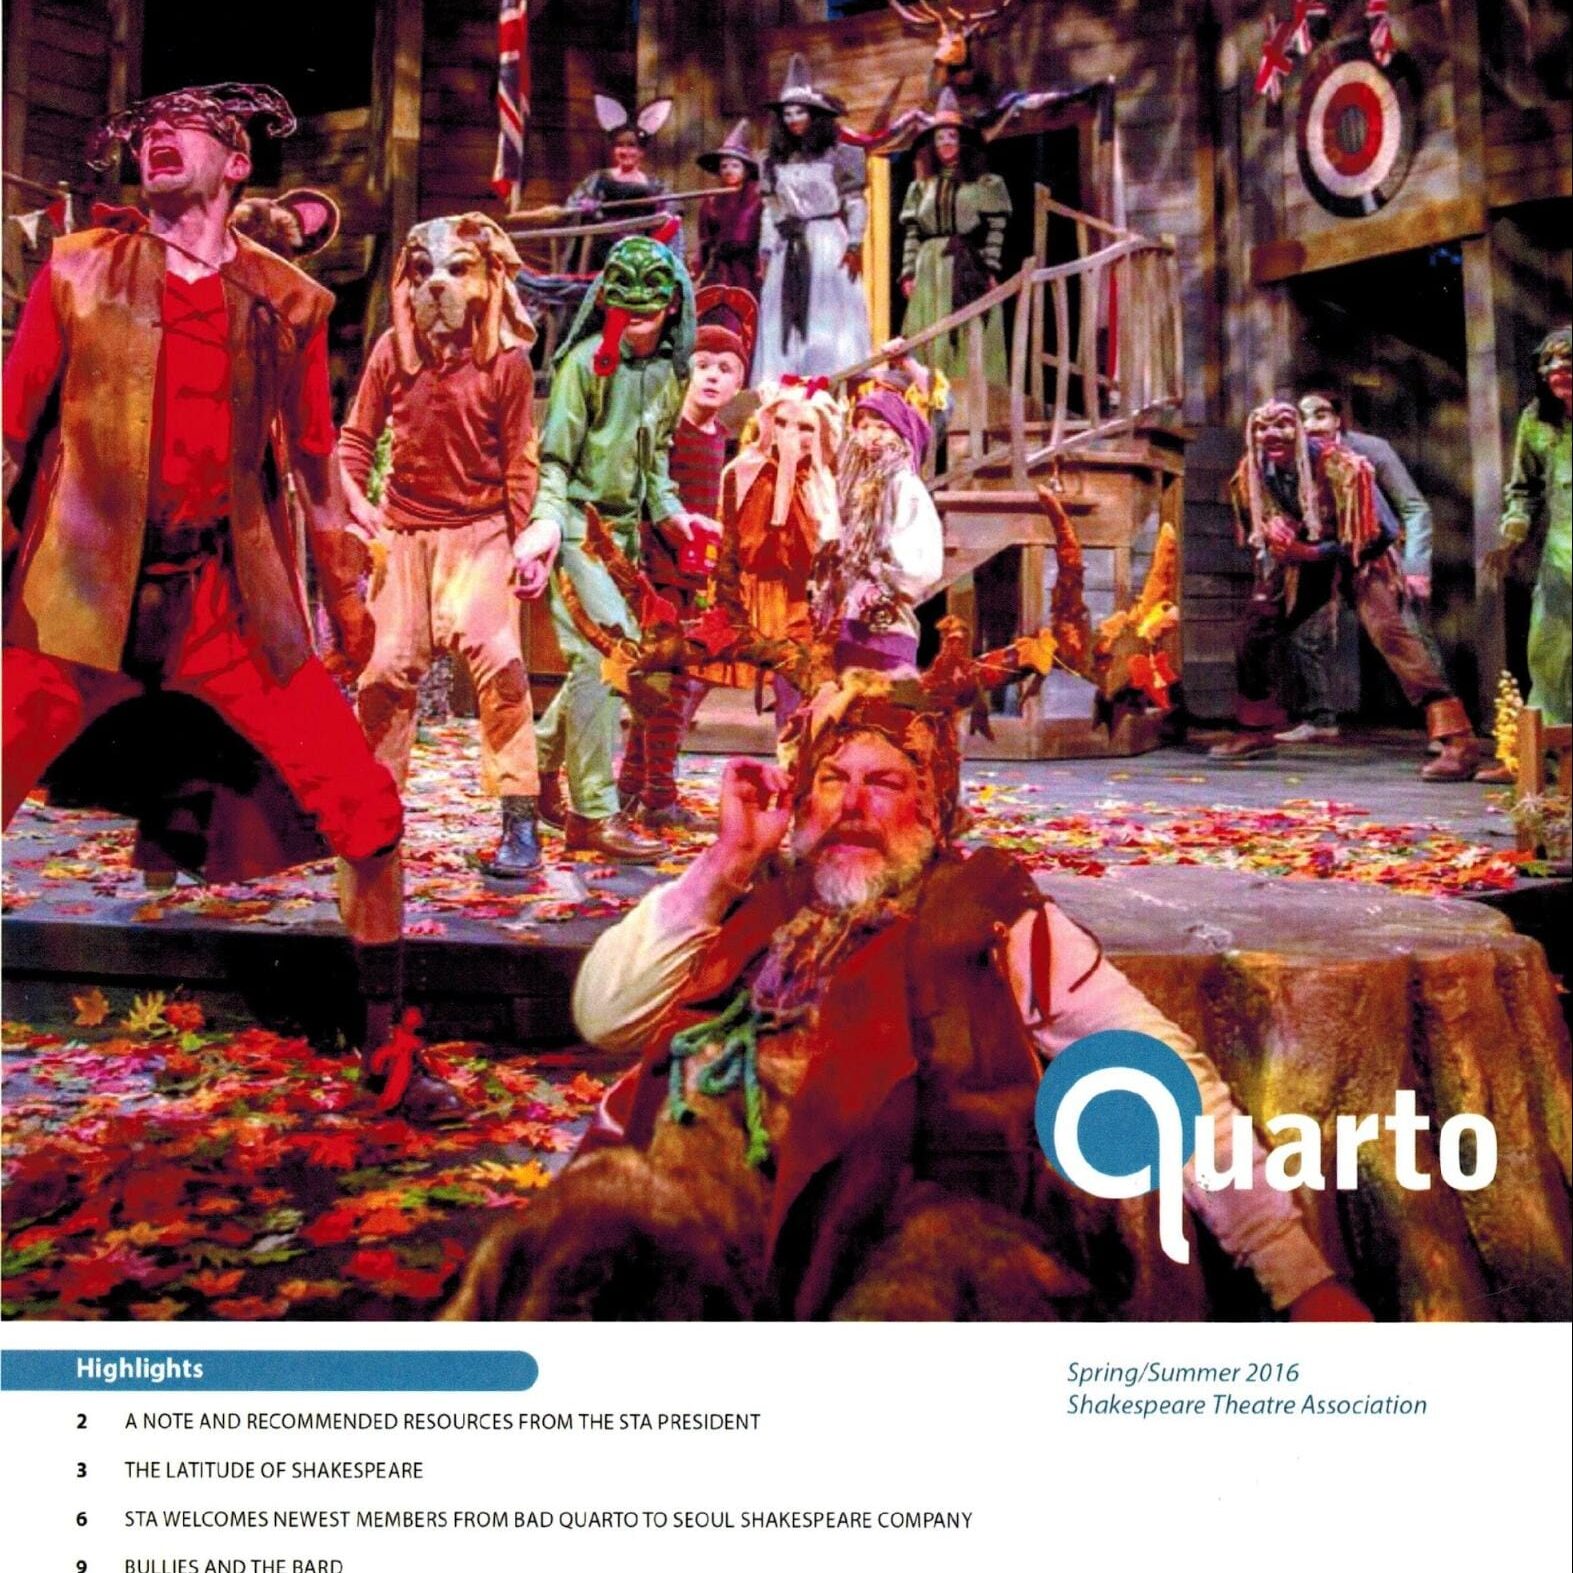 Shakespeare Quarto, Spring-Summer 2016: “Chatchkas and Magic, Making Weird, Wonderful Things for Shakespeare”